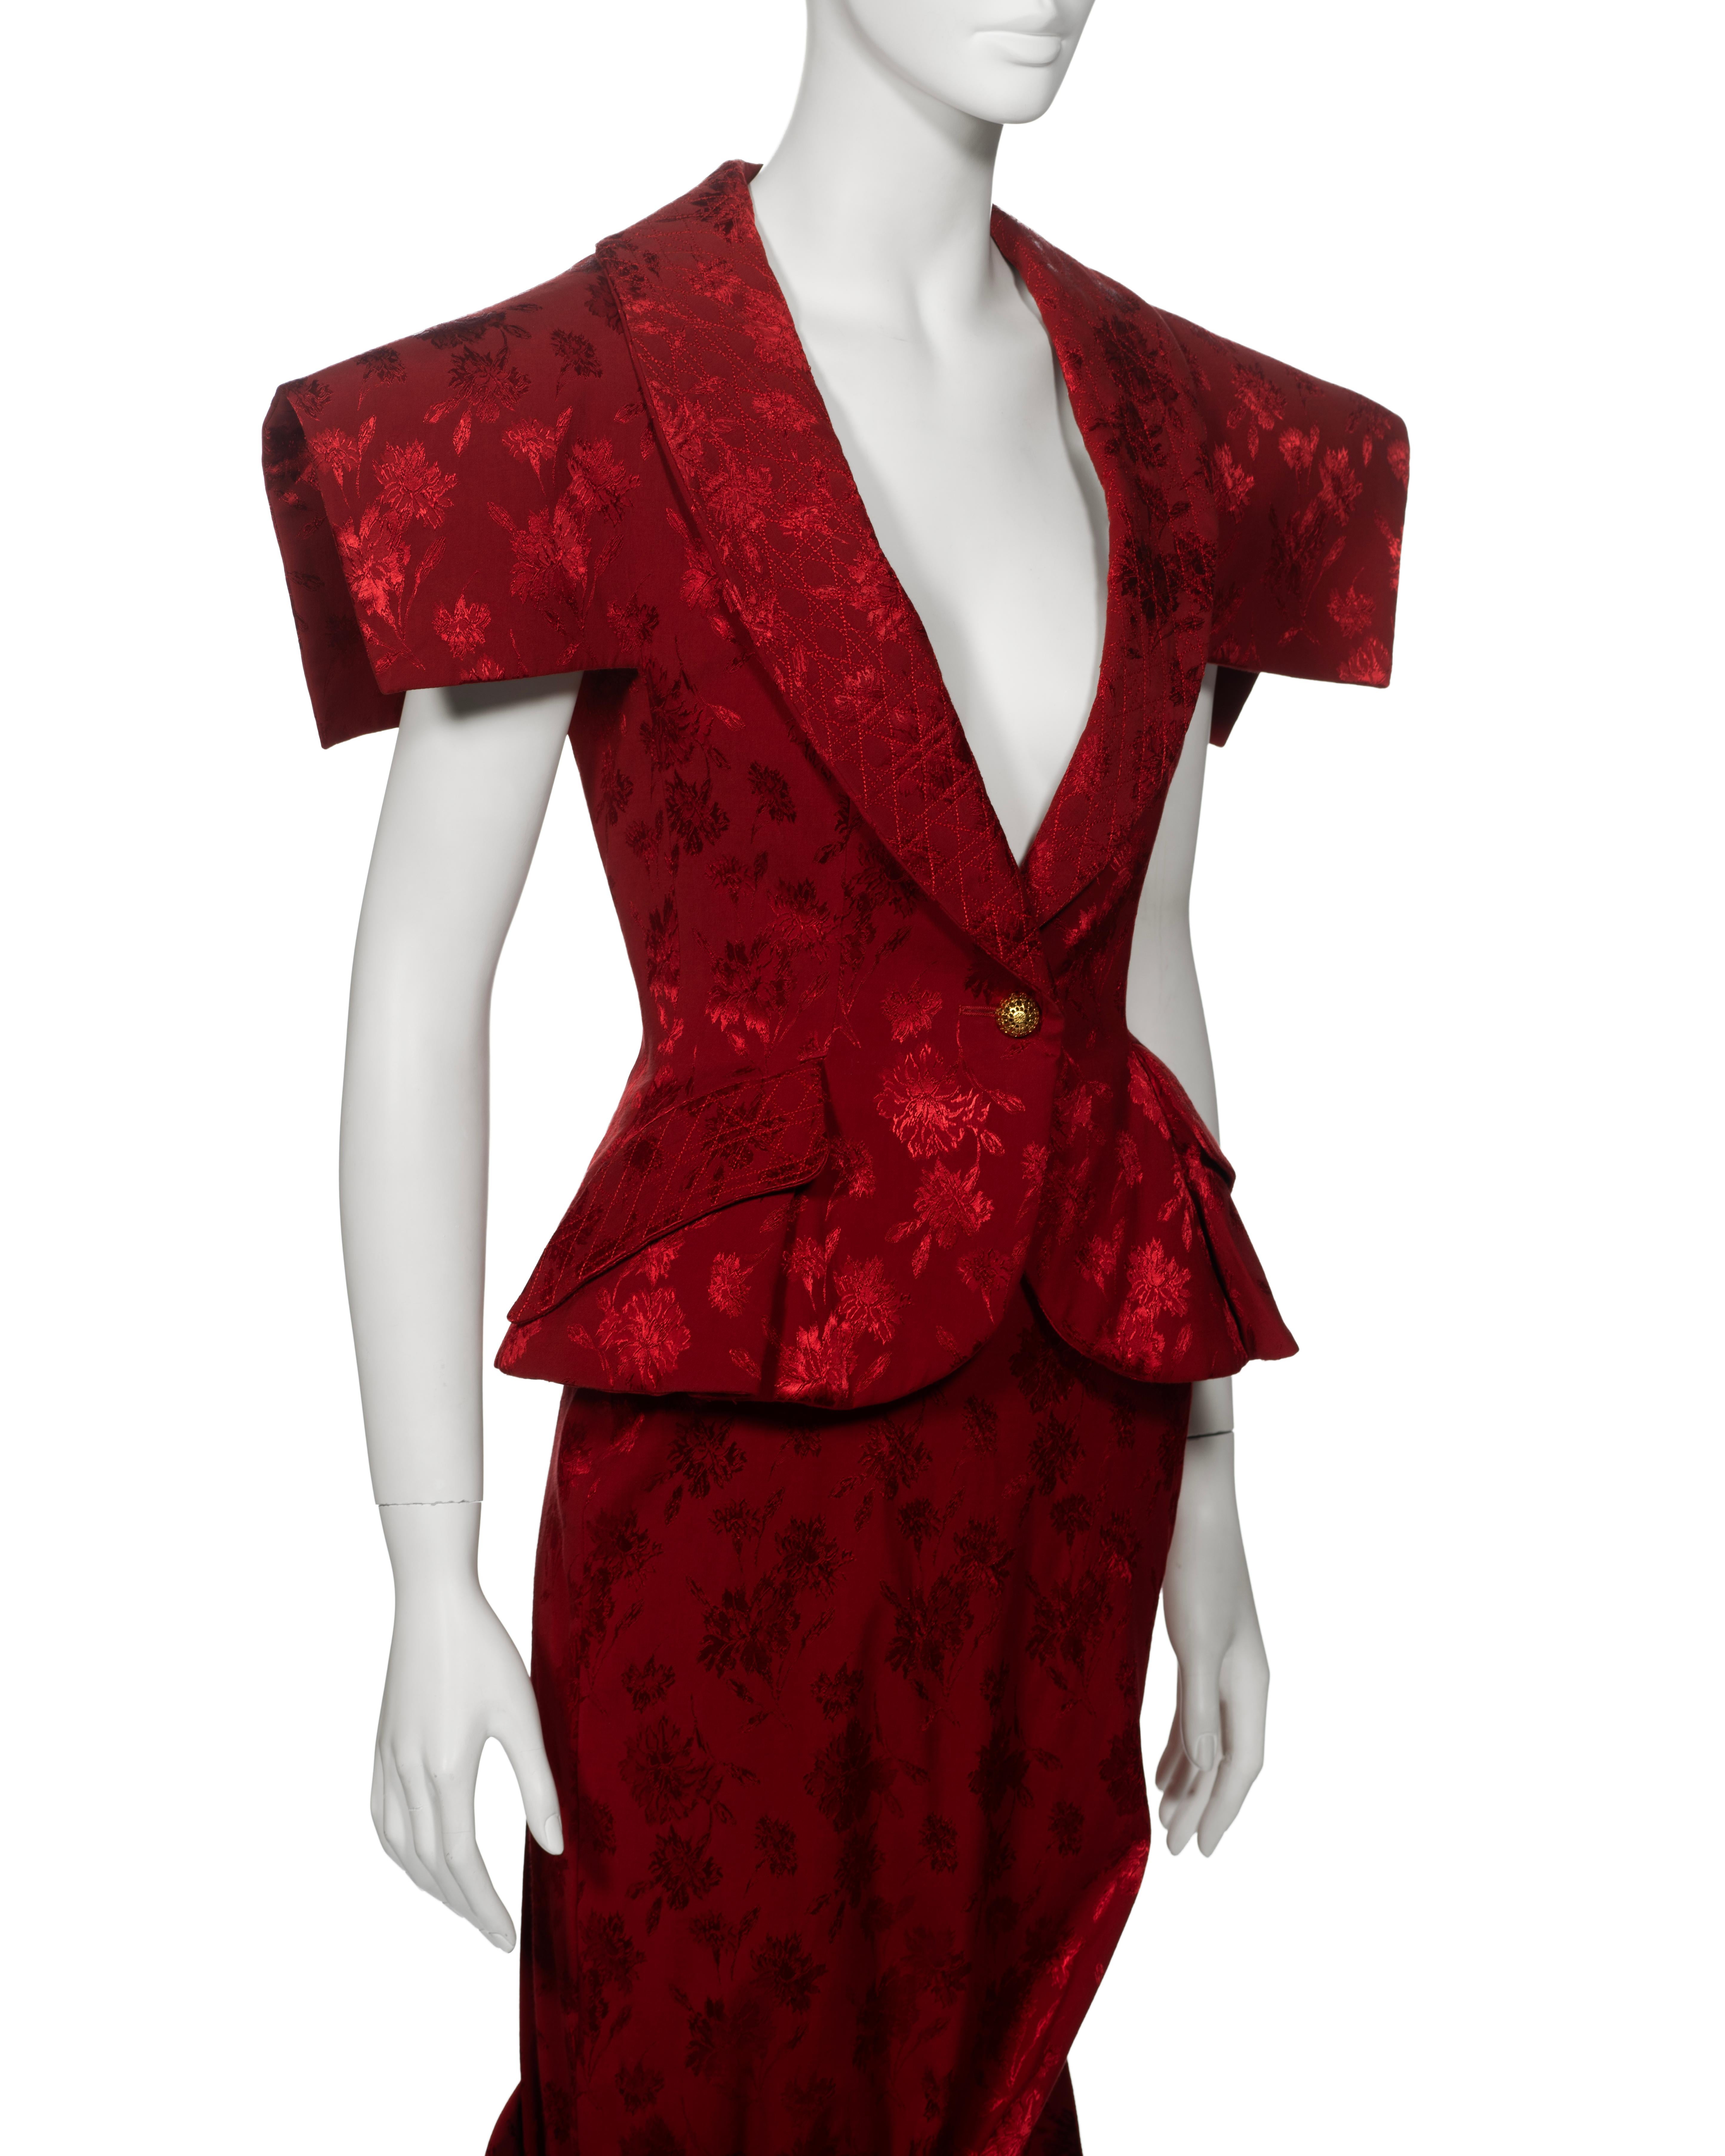 Christian Dior by John Galliano Red Floral Damask Evening Ensemble, fw 1997 14